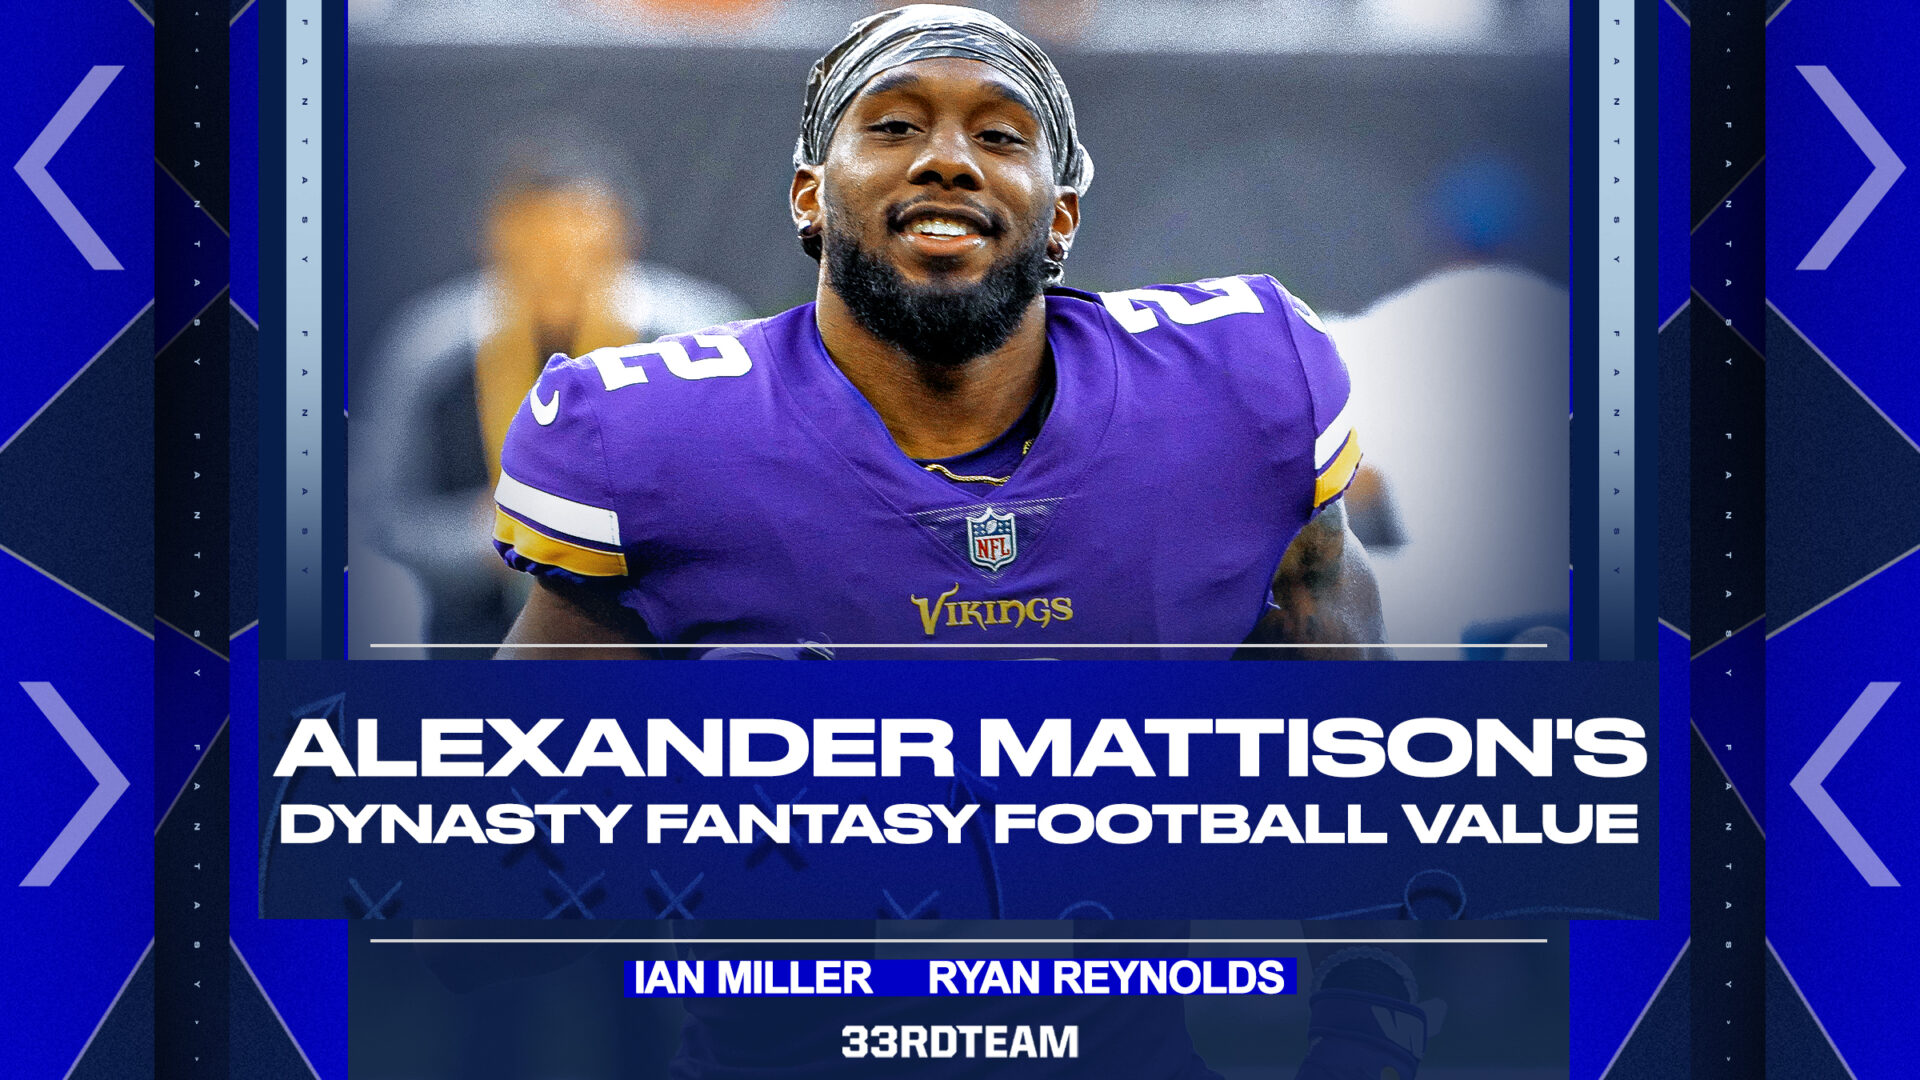 What Is Alexander Mattison’s Dynasty Fantasy Football Value?